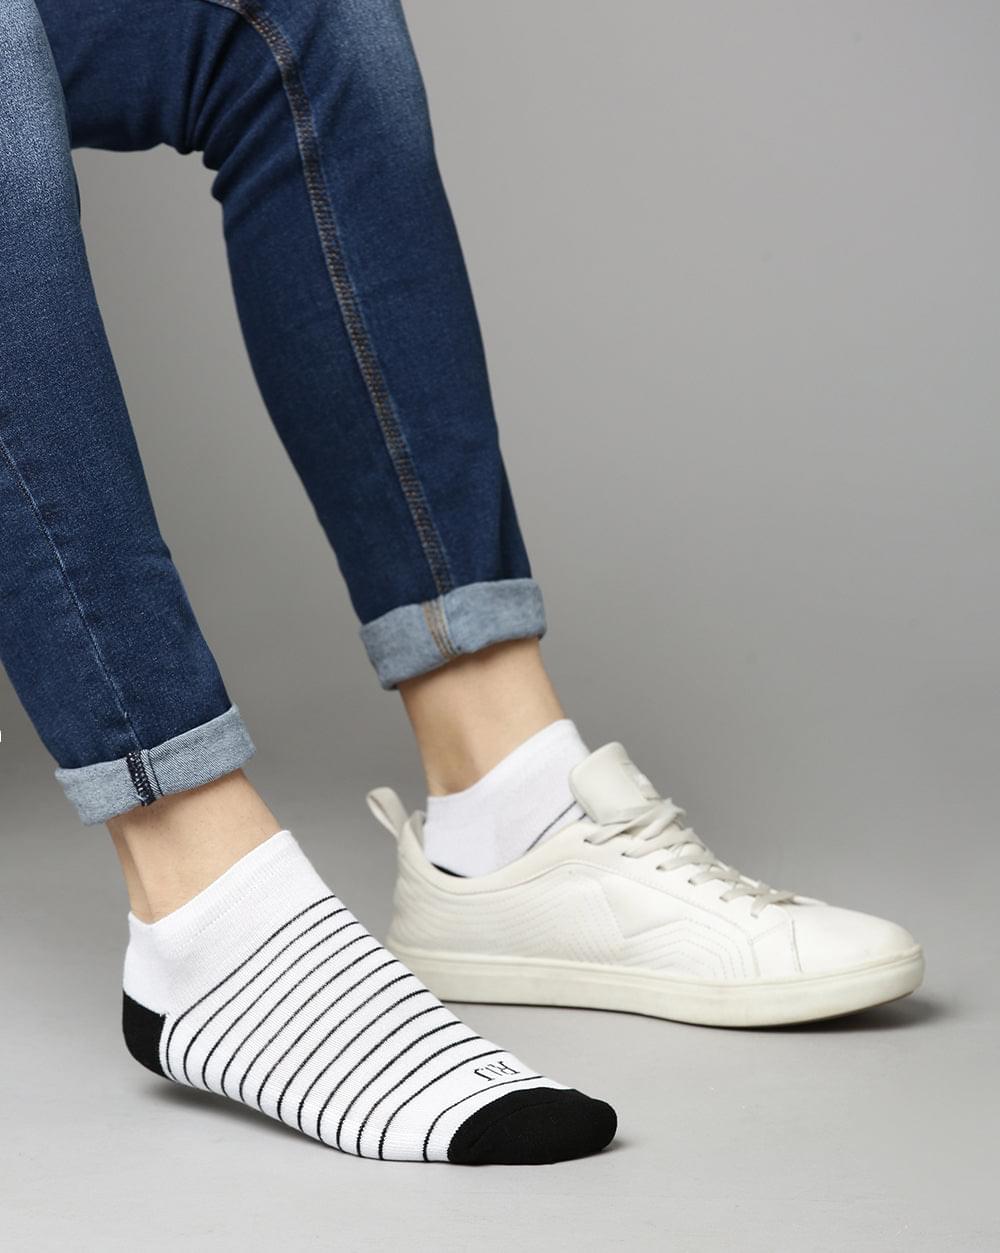 ANKLE SOCKS STRIPED AND COLOR BLOCKED